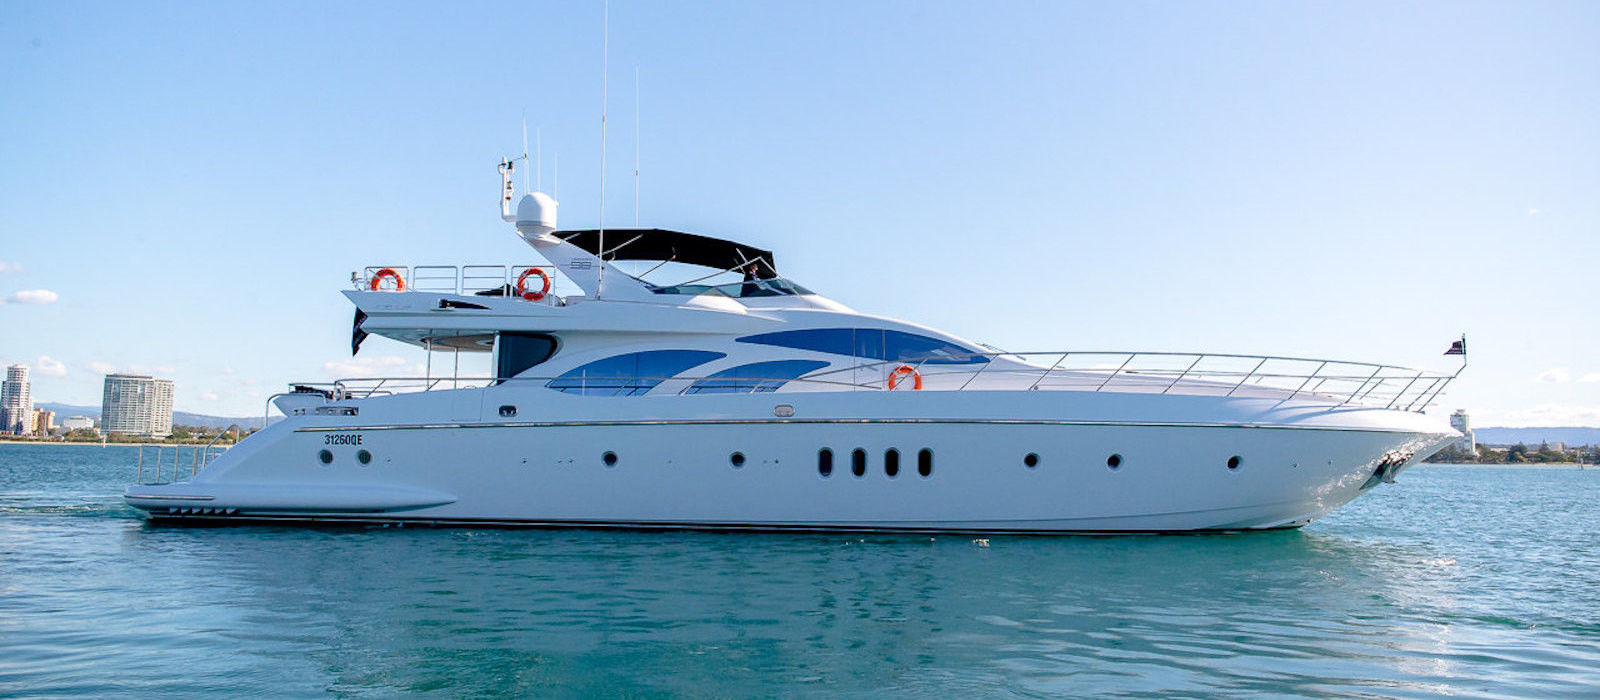 Main profile image of superyacht hire on Seven Star